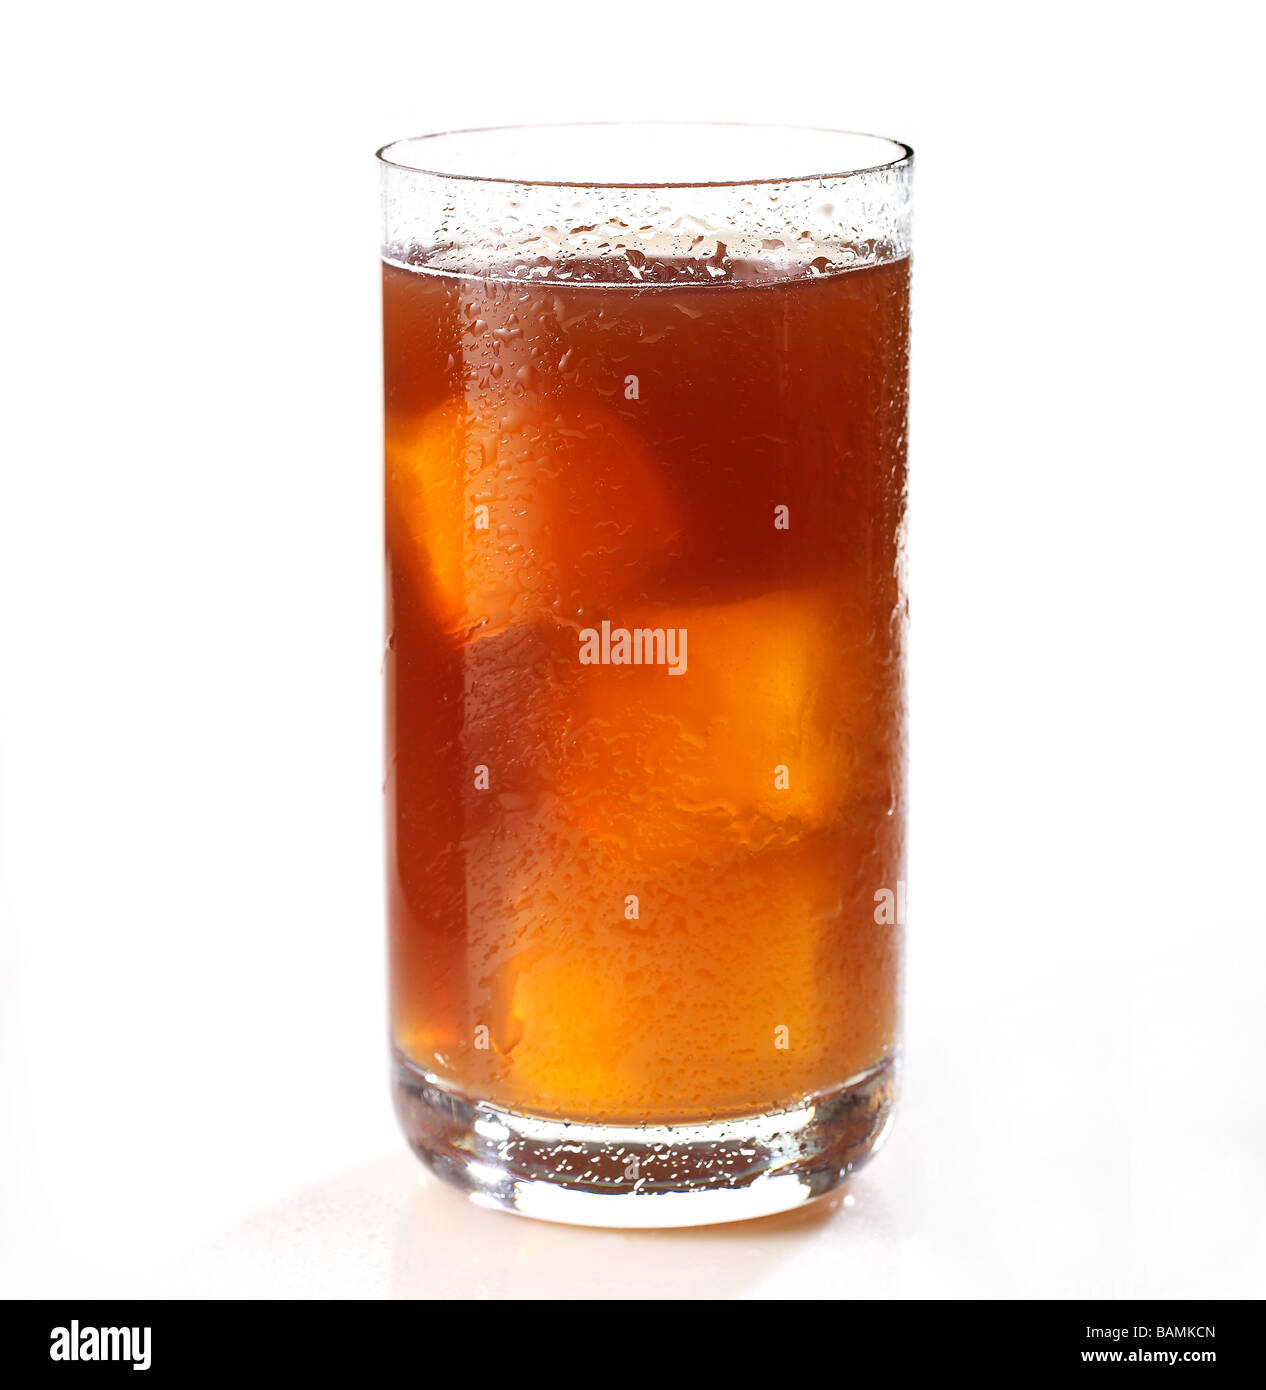 Iced Tea in a tall glass on a white surface Stock Photo